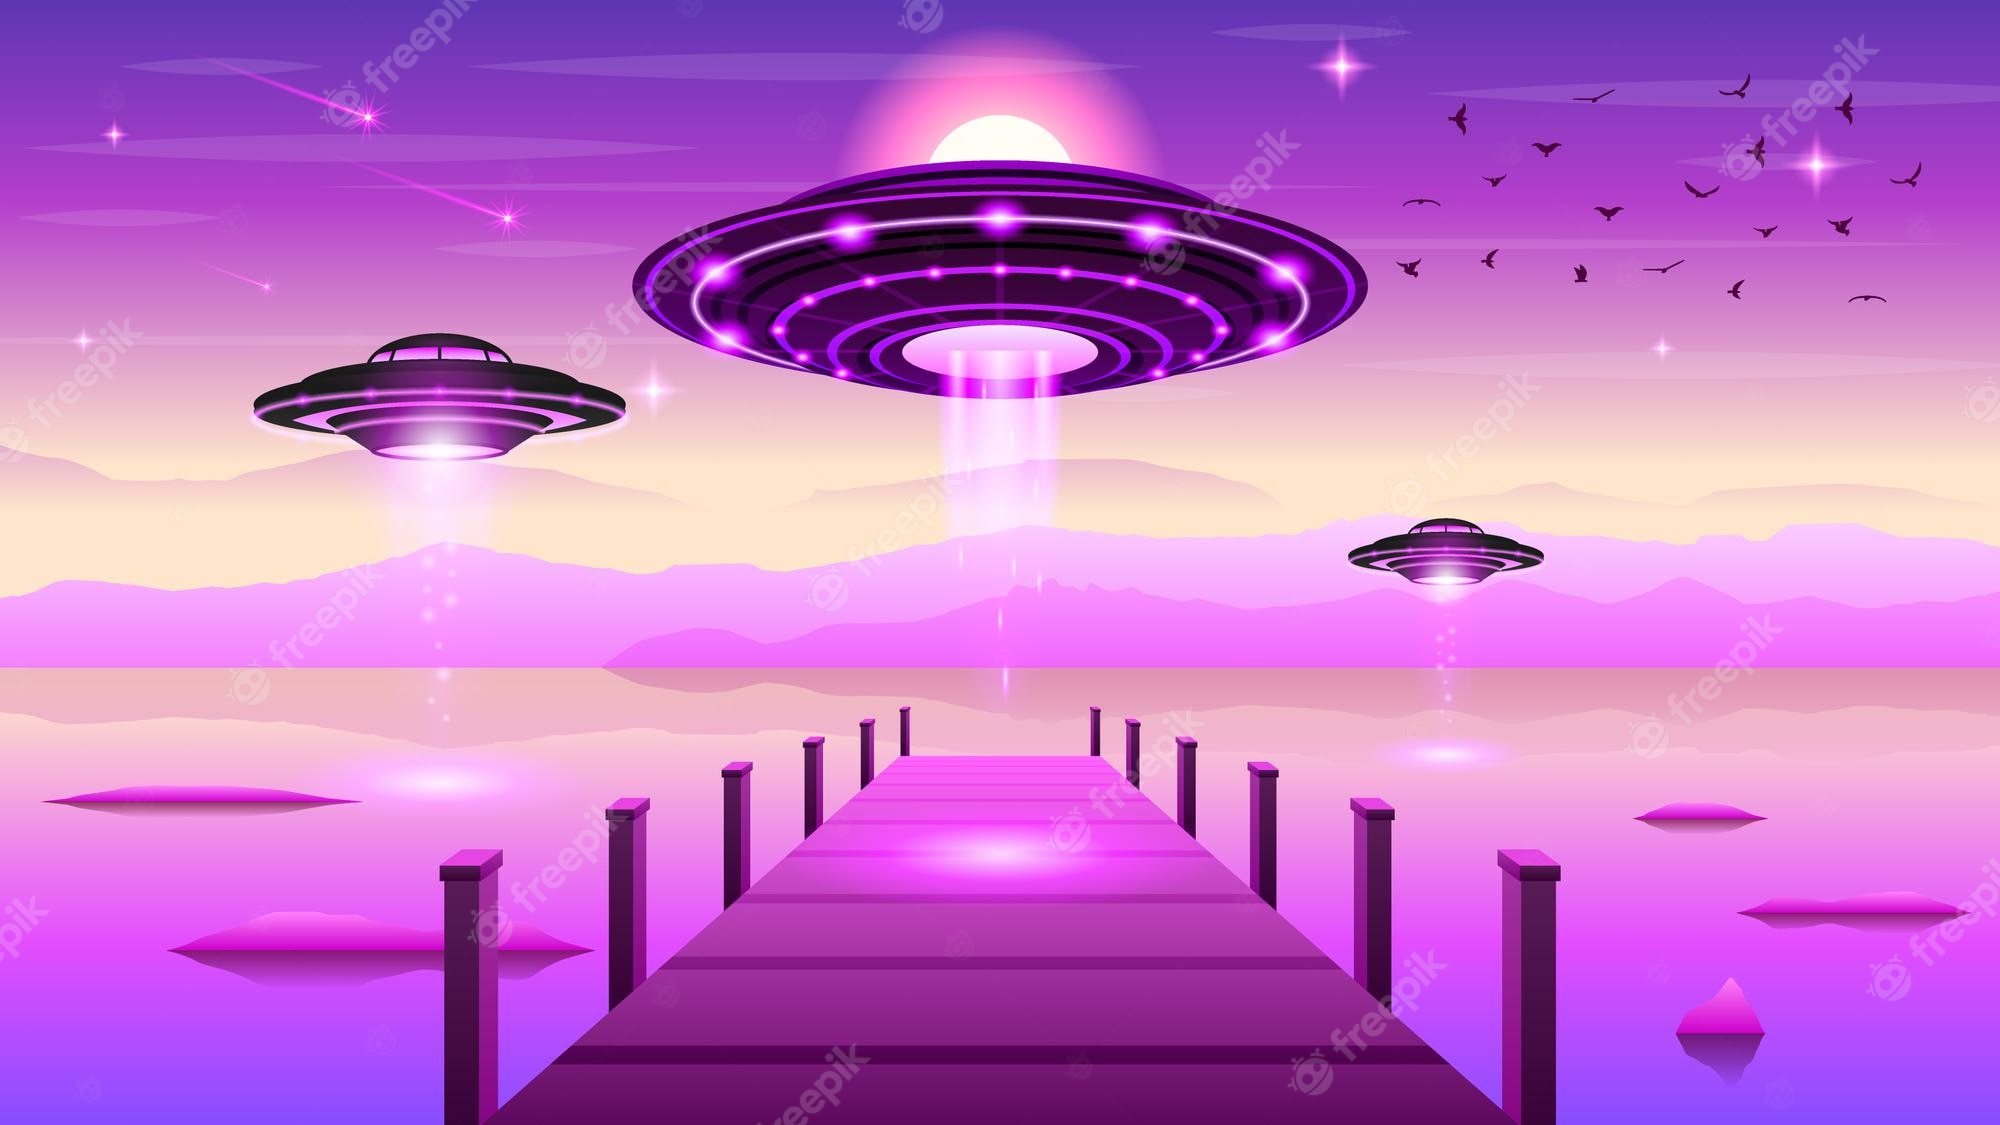 Premium Vector. Abstract alien on flying saucers in dark space planet background gradient unidentified flying object